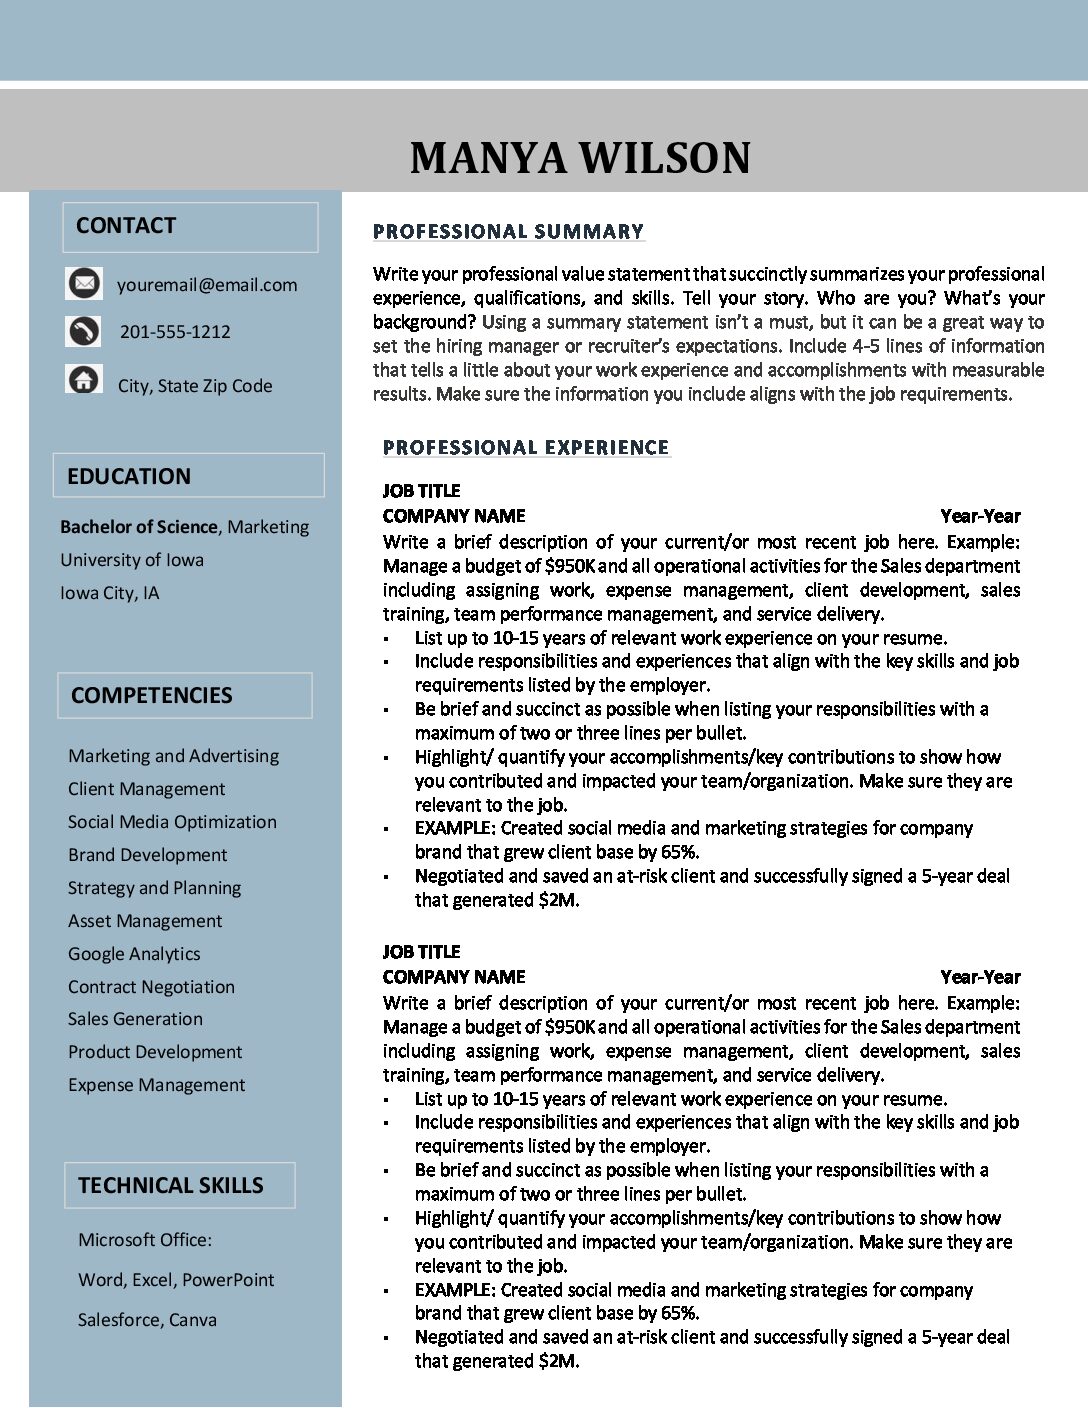 Avalon Res Template 1pg docx